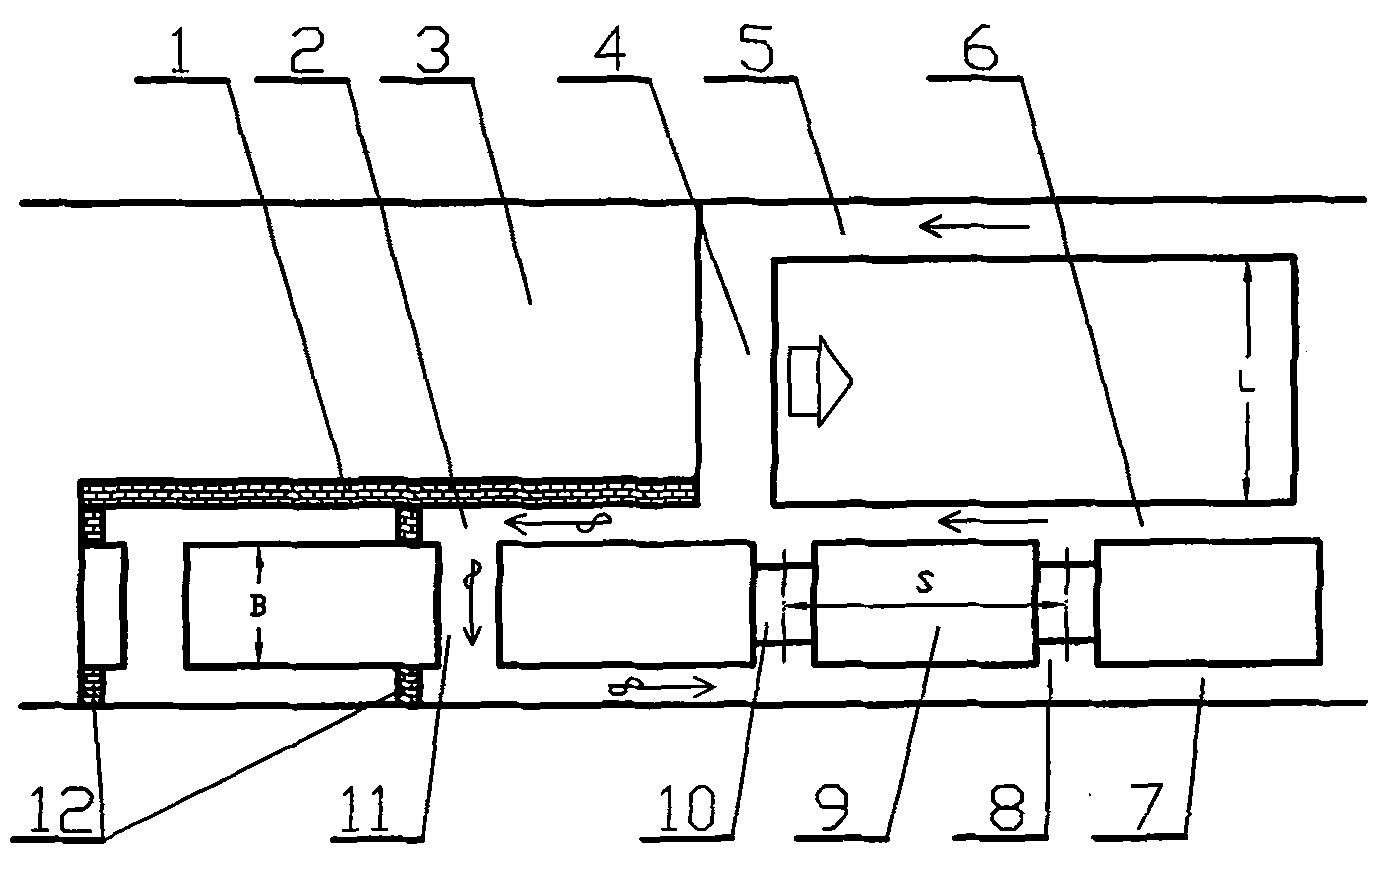 Inverse Y-shaped ventilation method for coal mining working face